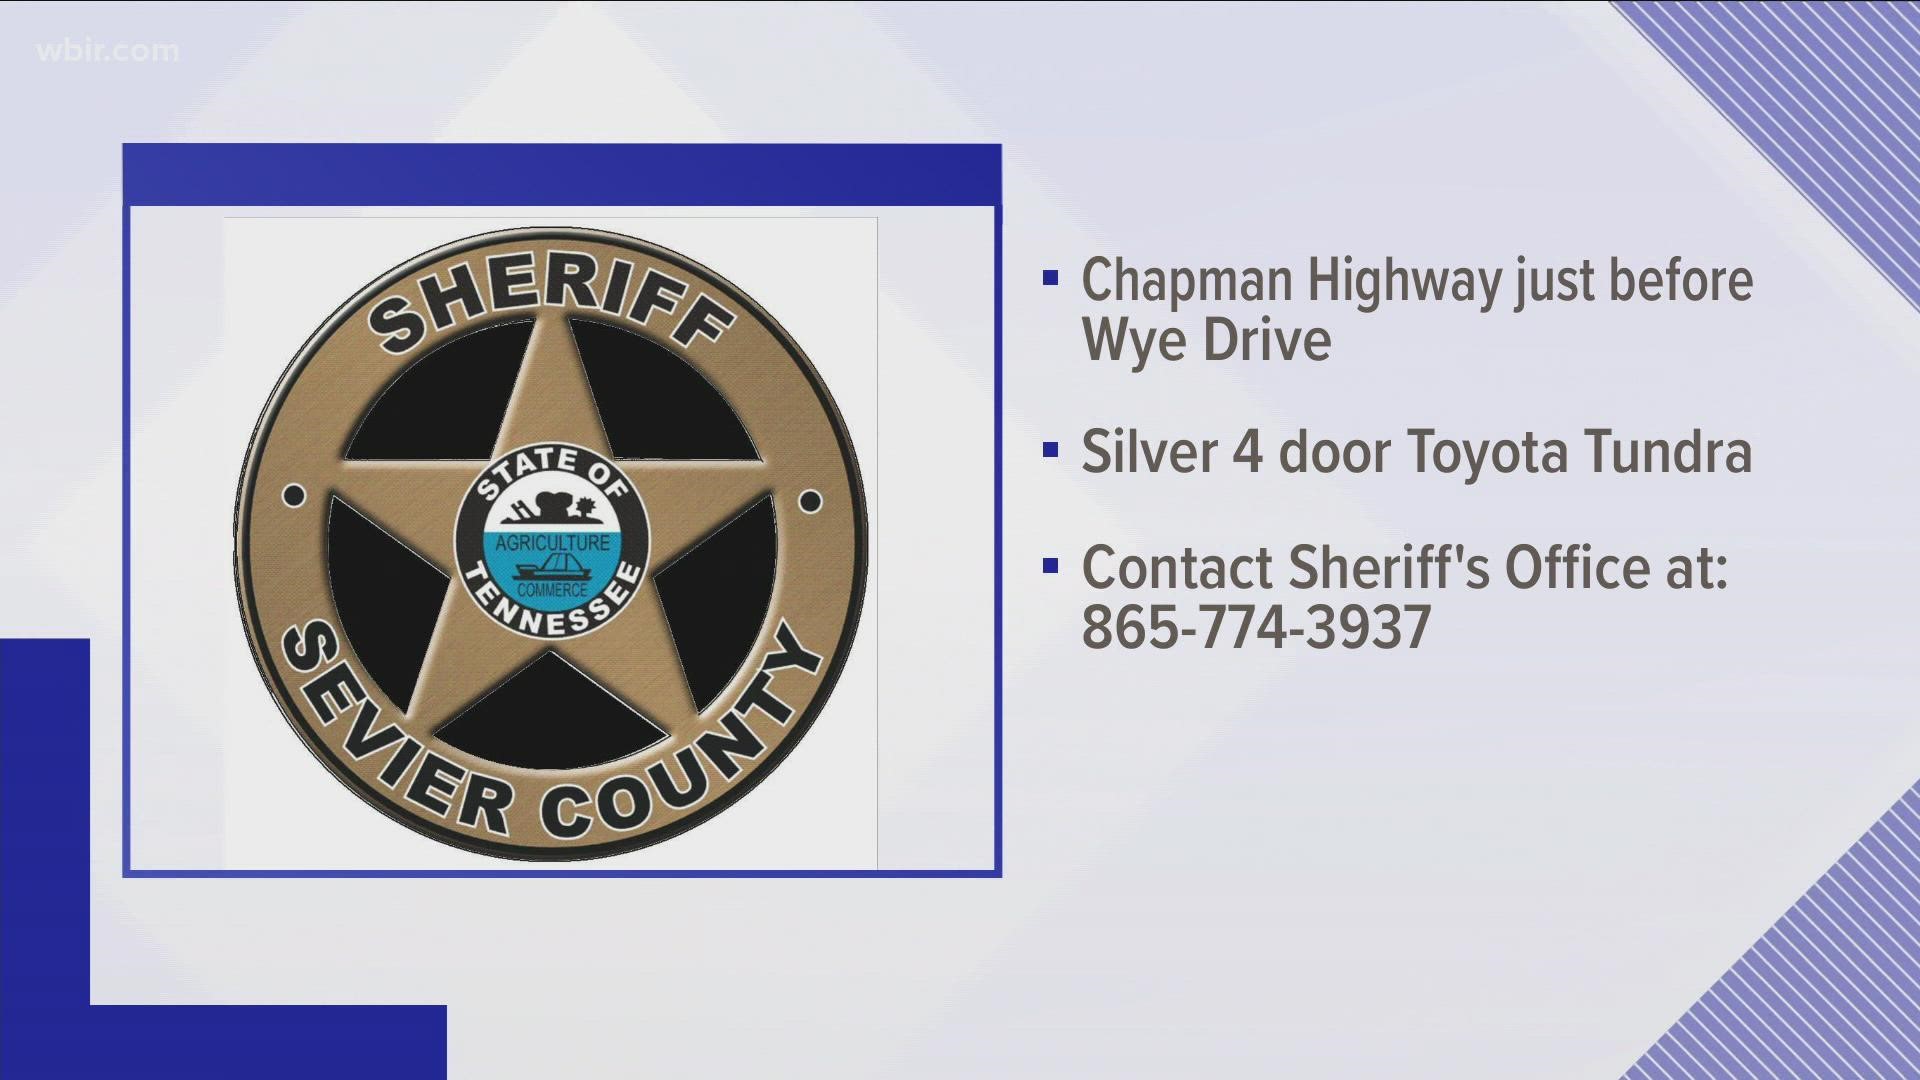 The Sevier County Sheriff's Office said it is searching for a Toyota pickup truck after a road rage incident turned into a stabbing on Chapman Highway.